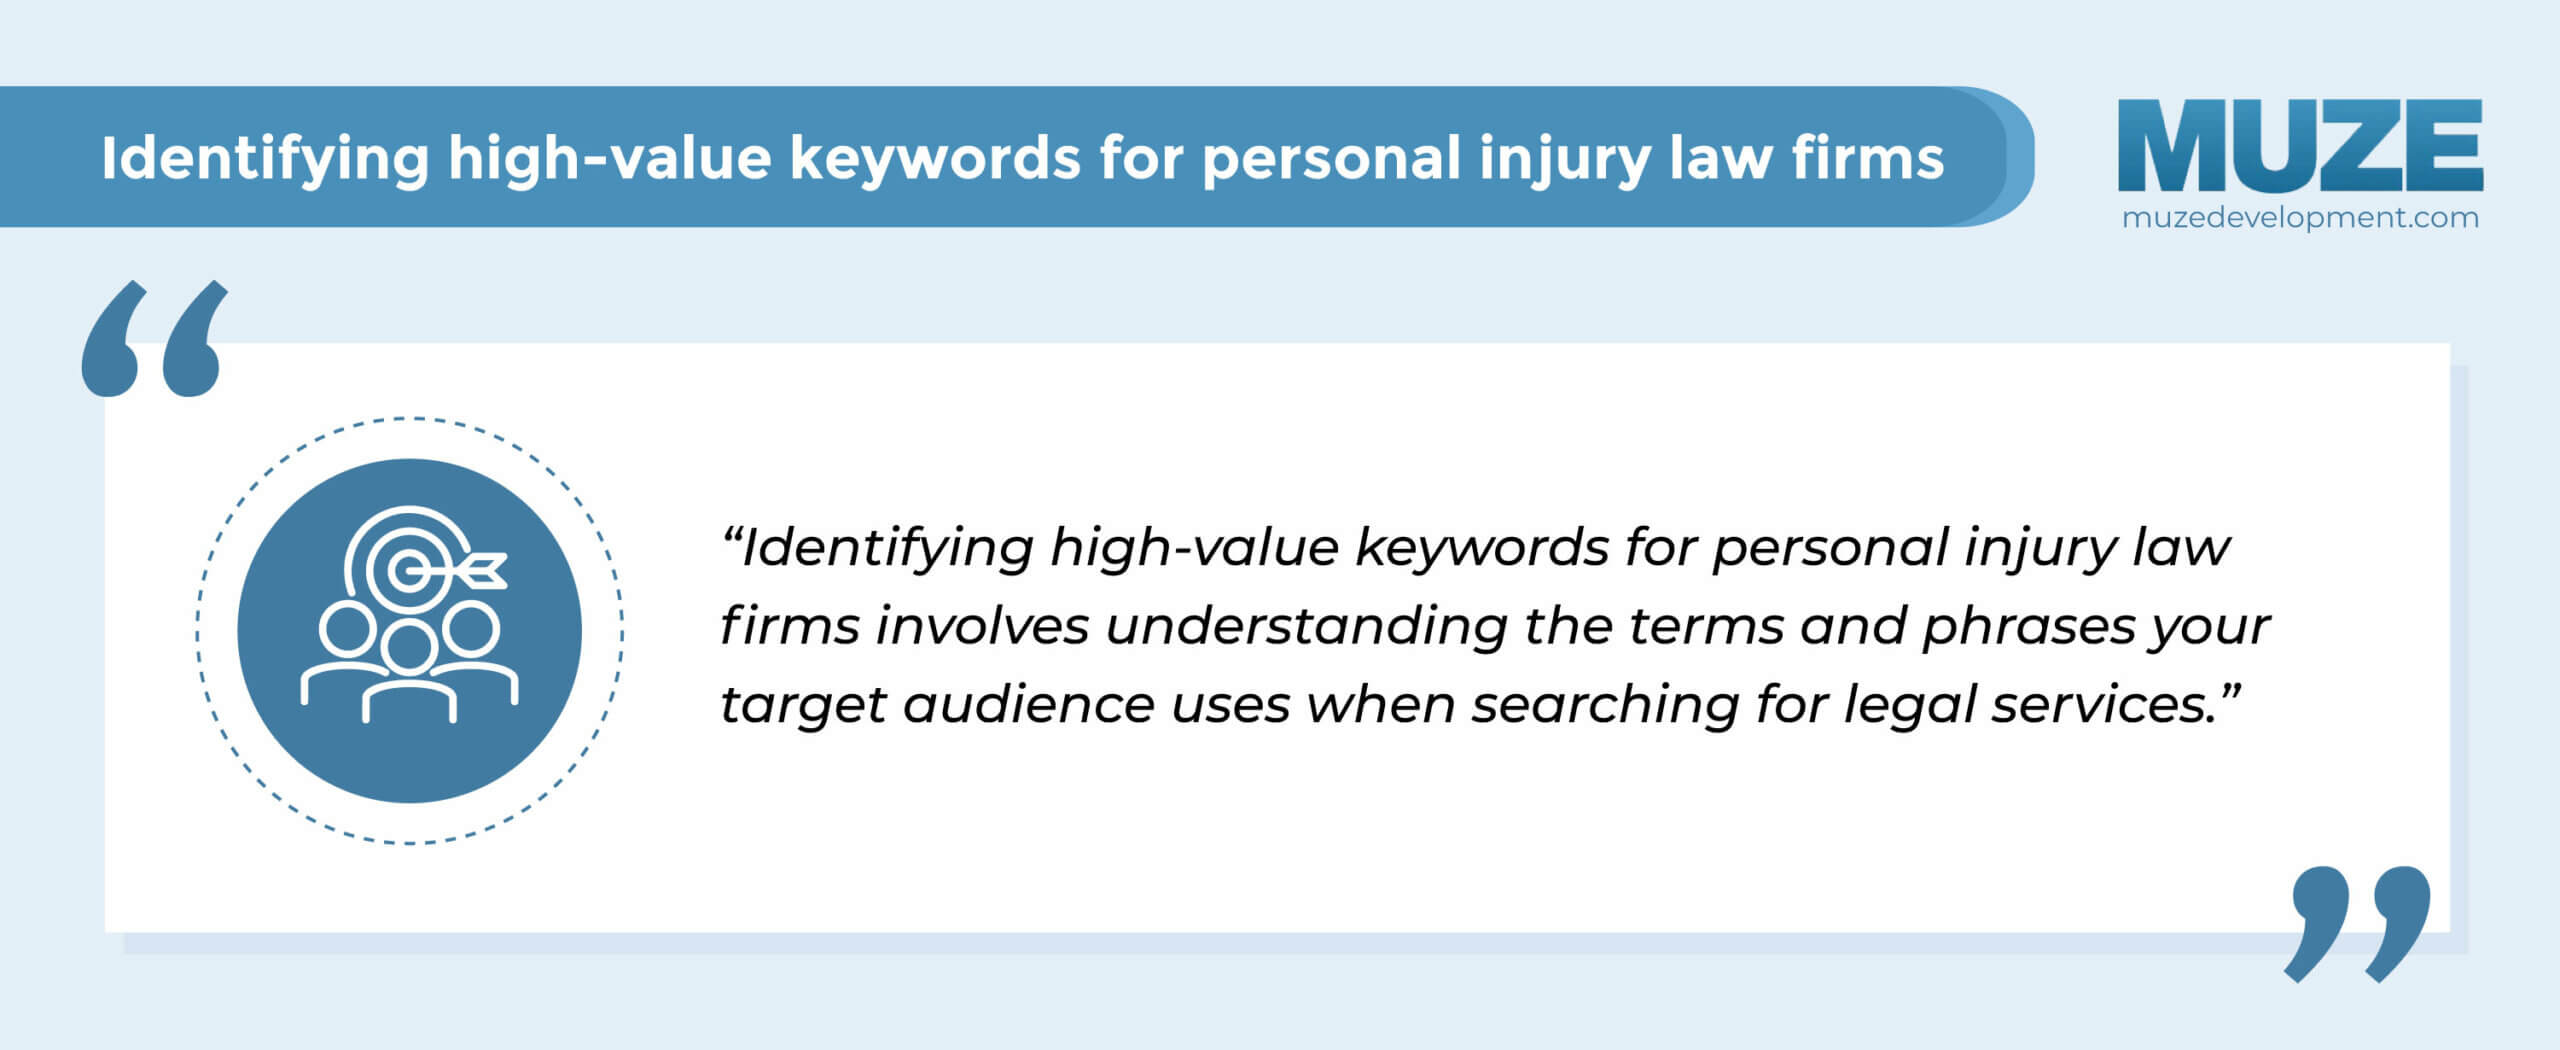 Identifying high-value keywords for personal injury law firms